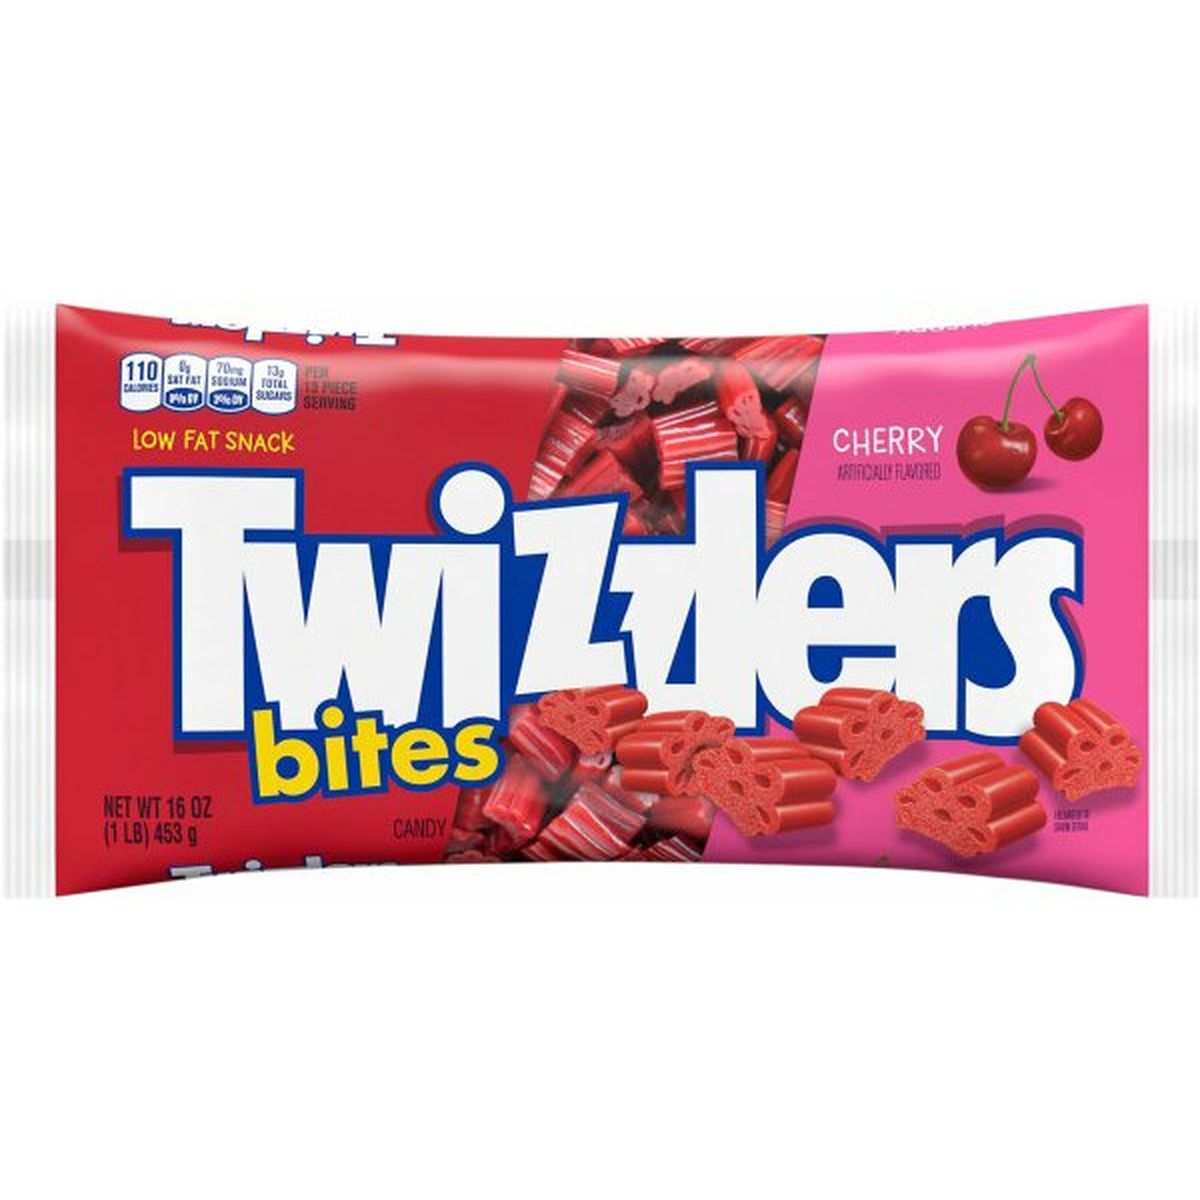 Calories in Twizzlers Candy, Cherry, Bites